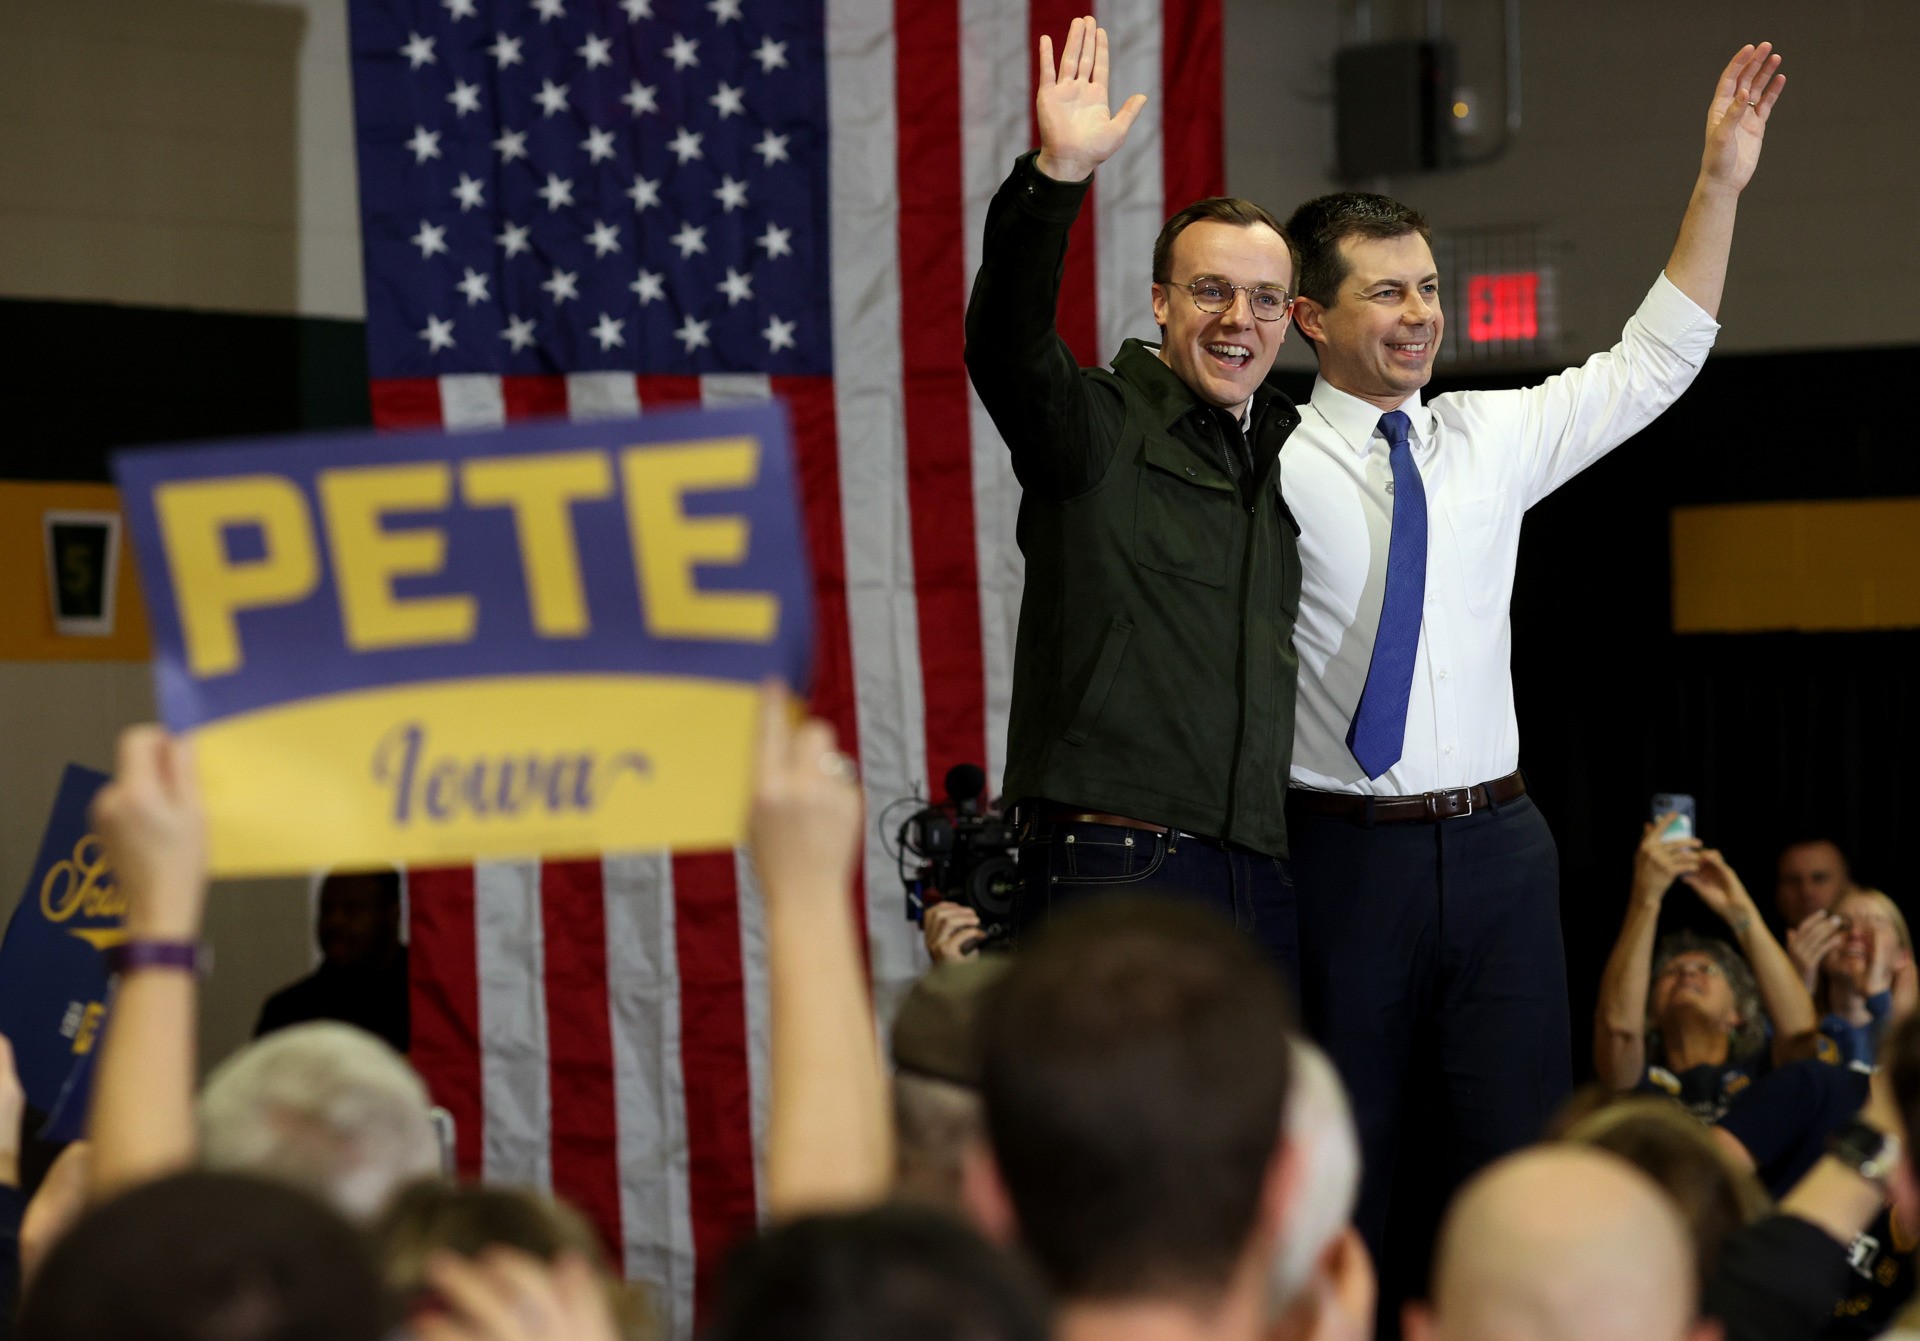 CORALVILLE, IOWA - FEBRUARY 02: Democratic presidential candidate former South Bend, Indiana Mayor Pete Buttigieg (R) and his husband Chasten (L) wave to supporters after the candidate spoke at Northwest Junior High School during a Get Out The Caucus rally February 2, 2020 in Coralville, Iowa. Iowa holds the state's caucuses tomorrow, the first test for prospective presidential candidates in the 2020 election. (Photo by Win McNamee/Getty Images)